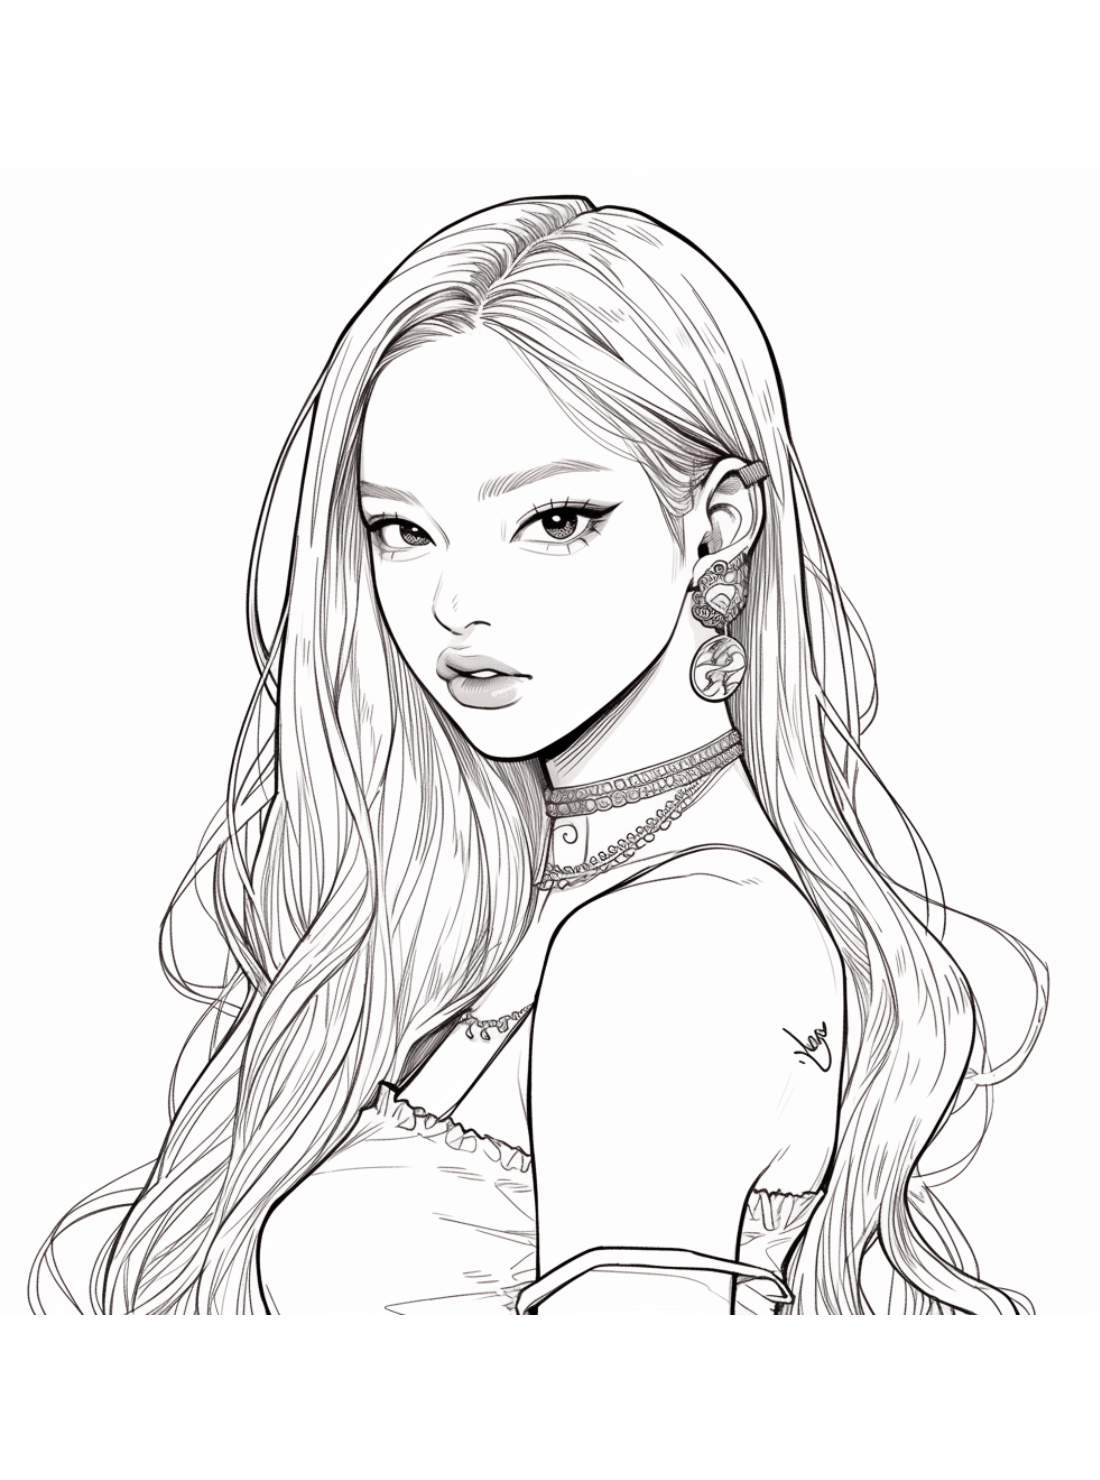 Blackpink Jennie Coloring Pages - Coloring Games Online